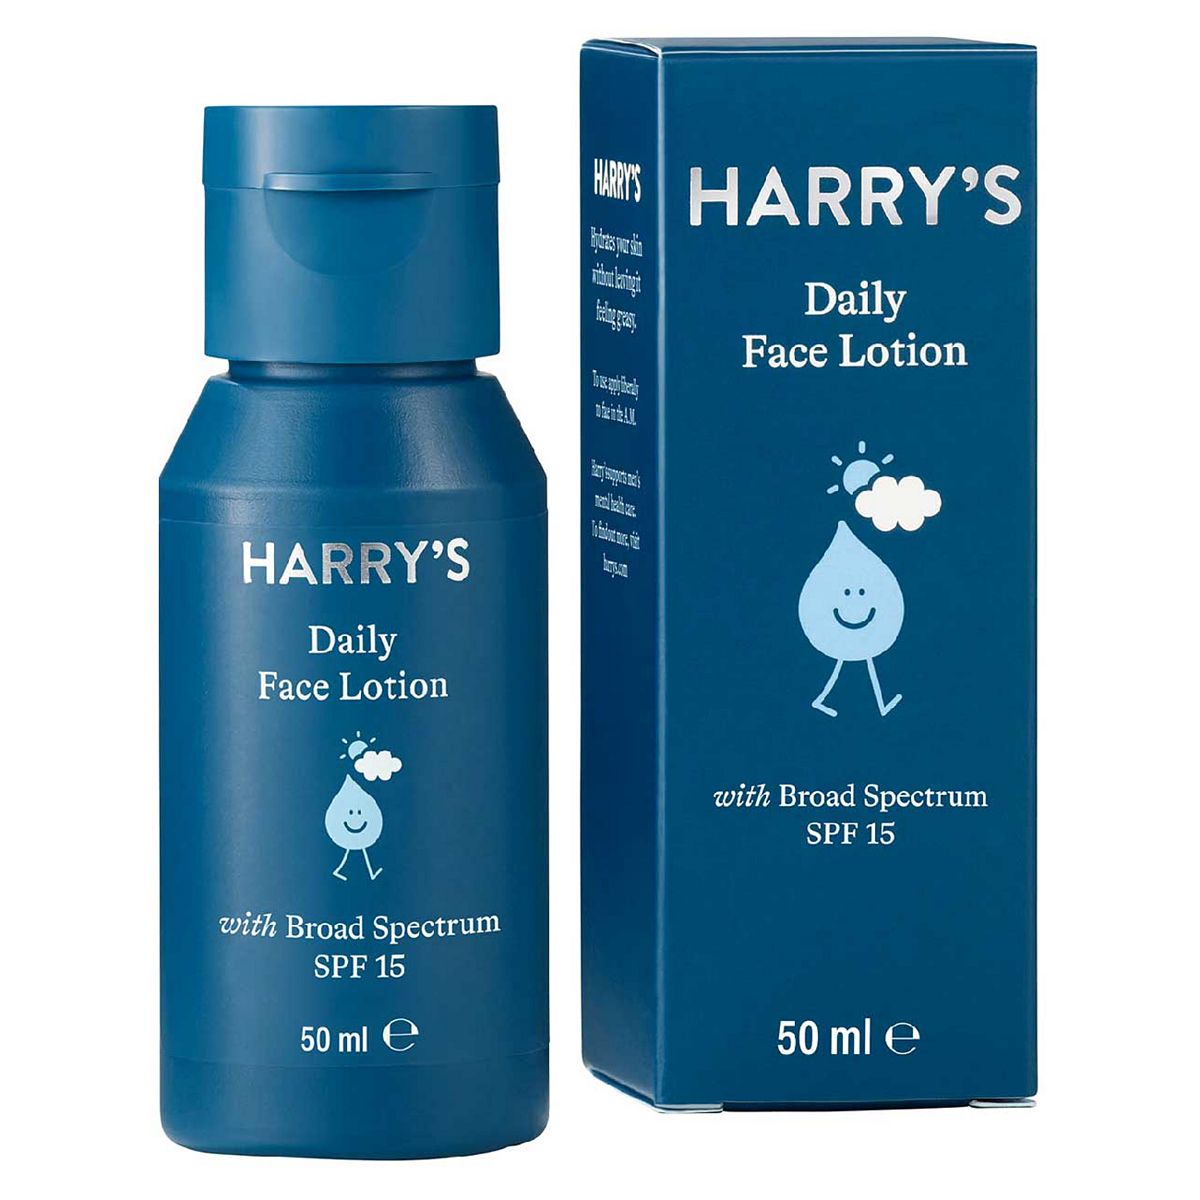 Harry's Men's Face Lotion SPF 15 50ml Aftershave Boots   